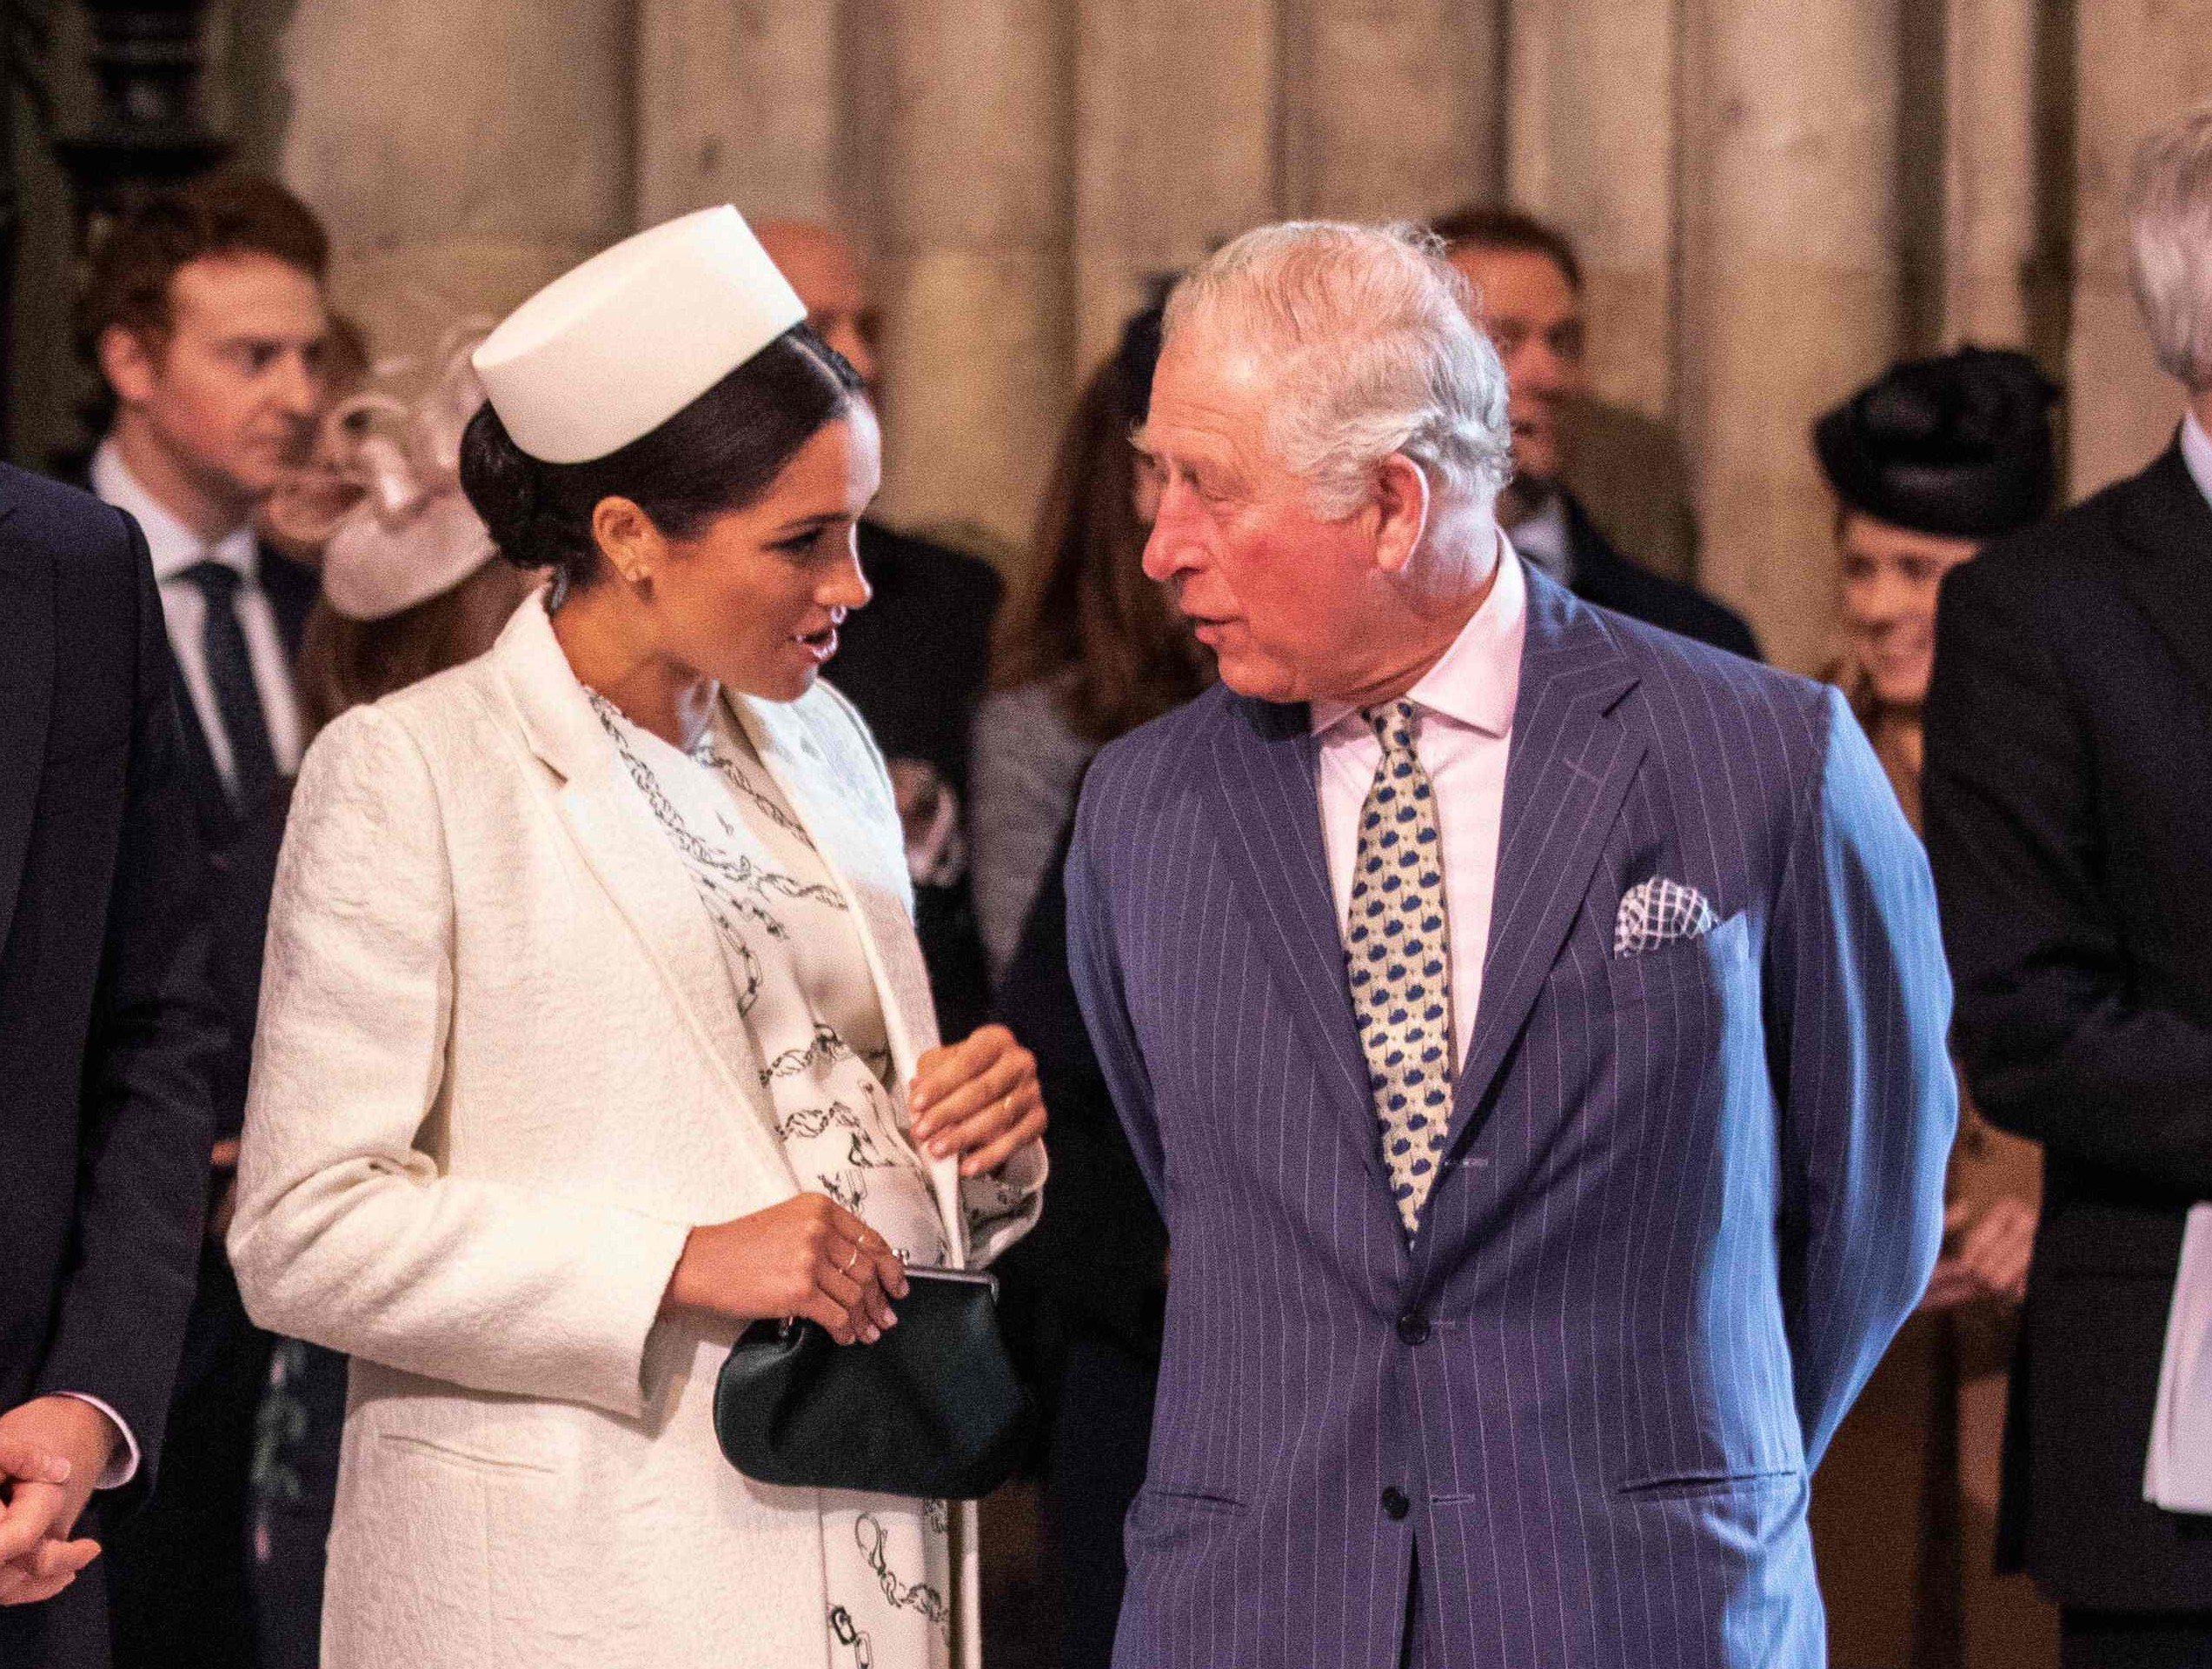 Meghan Markle and Prince Charles, who reportedly asked the duchess to shut up Thomas Markle, talk during the 2019 Commonwealth Day service at Westminster Abbey